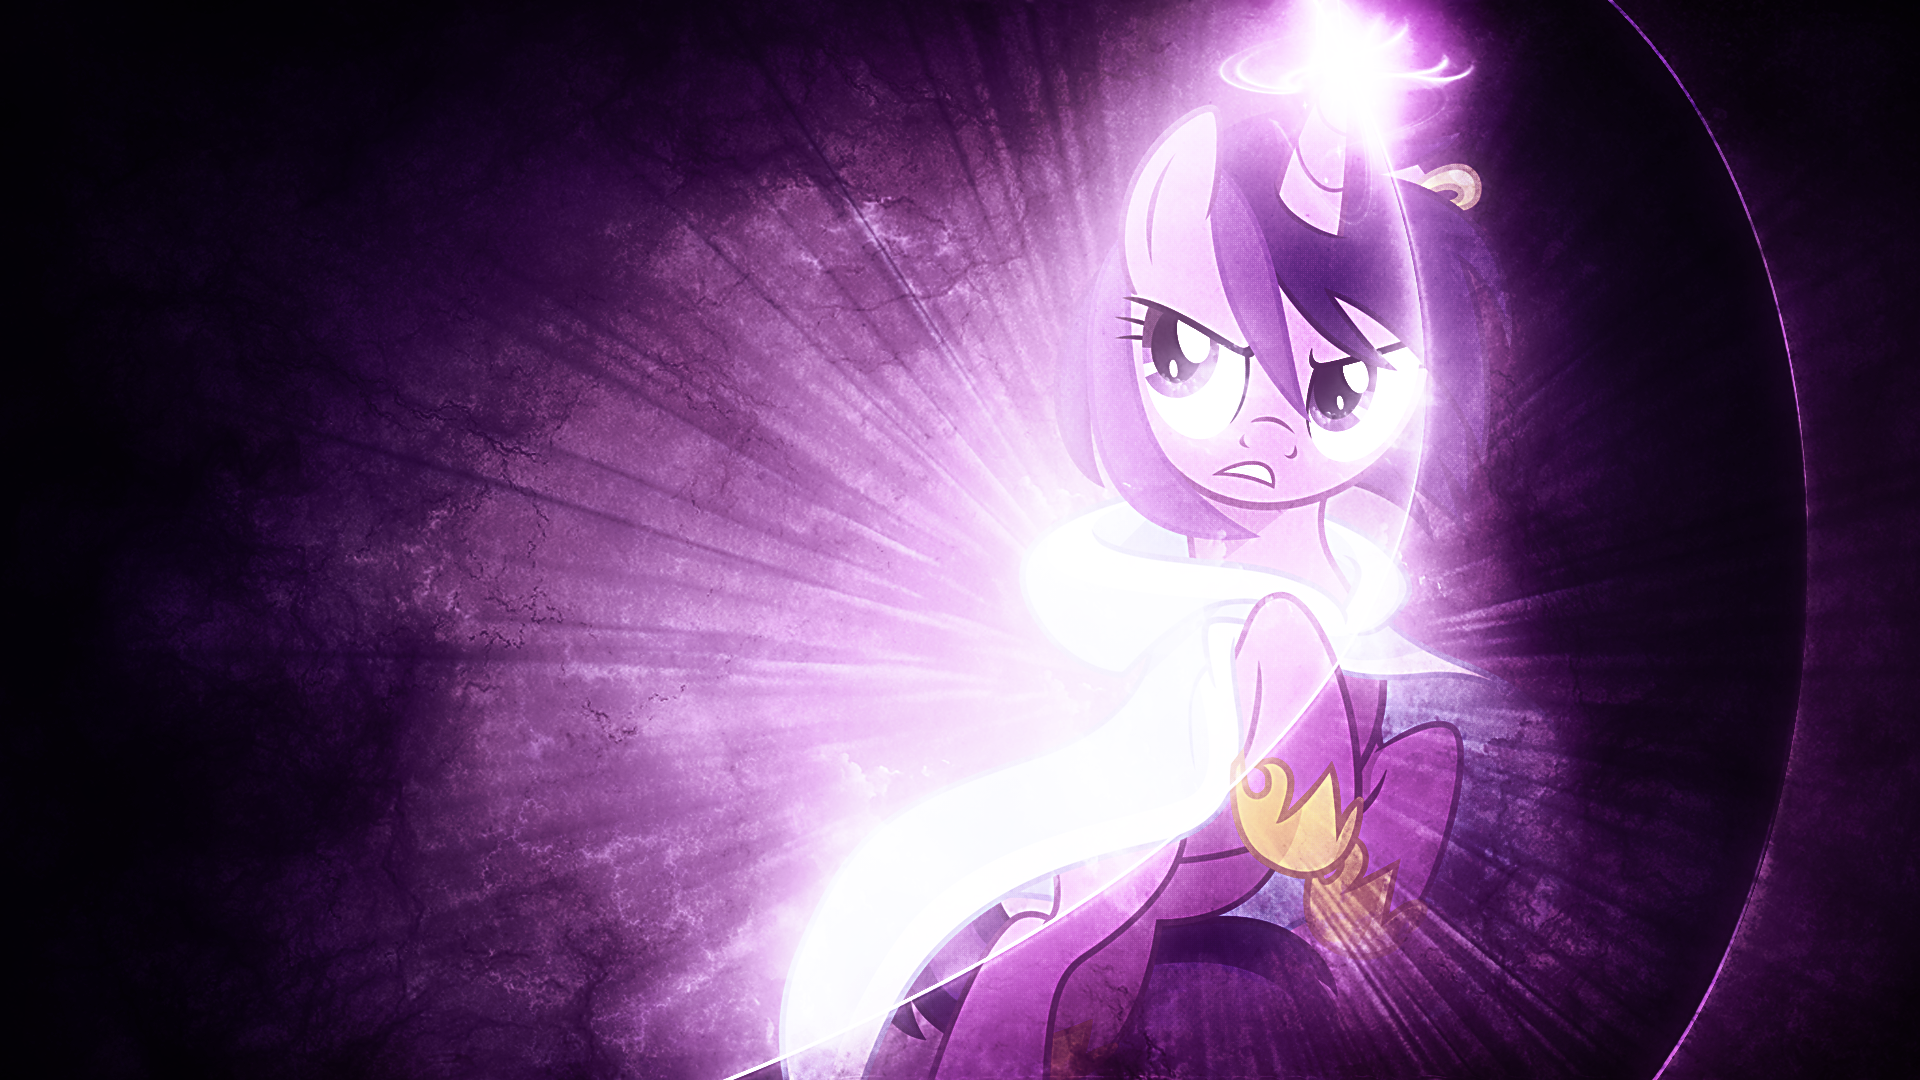 Amethyst Star - Wallpaper by Equestria-Prevails and Tzolkine